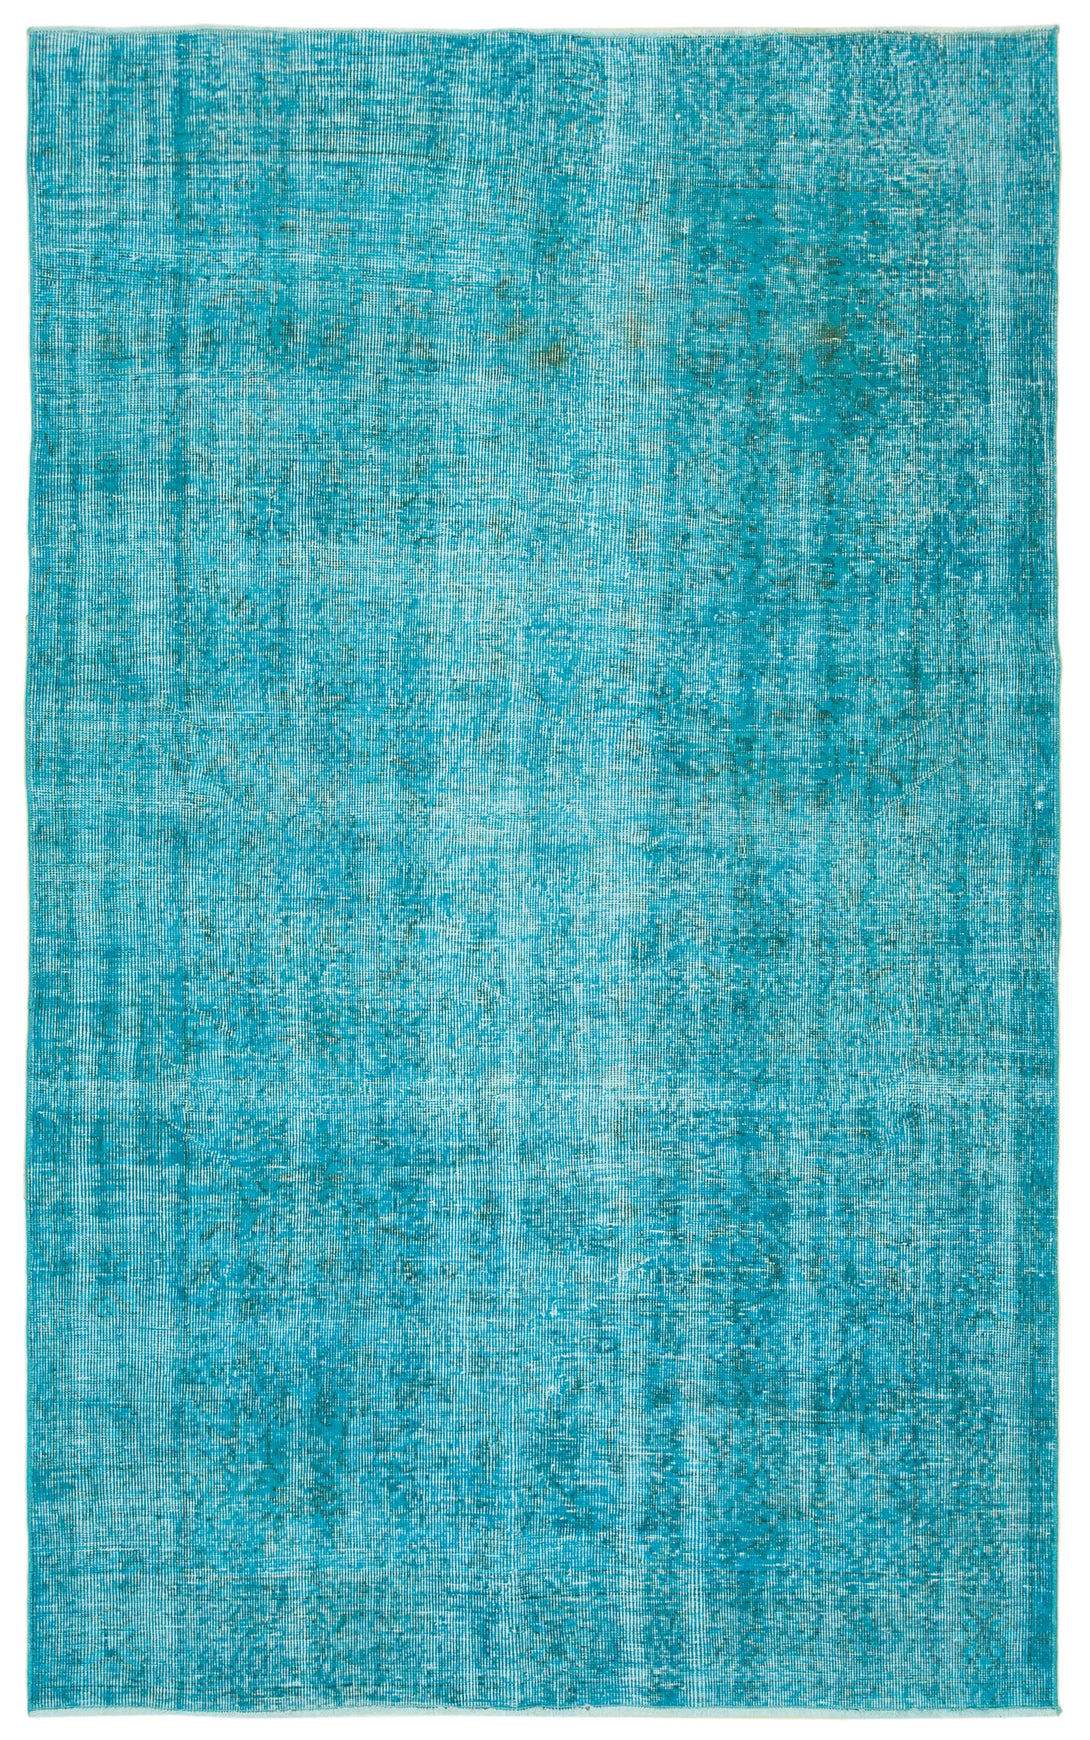 Handmade Overdyed Area Rug > Design# OL-AC-34760 > Size: 5'-3" x 8'-5", Carpet Culture Rugs, Handmade Rugs, NYC Rugs, New Rugs, Shop Rugs, Rug Store, Outlet Rugs, SoHo Rugs, Rugs in USA